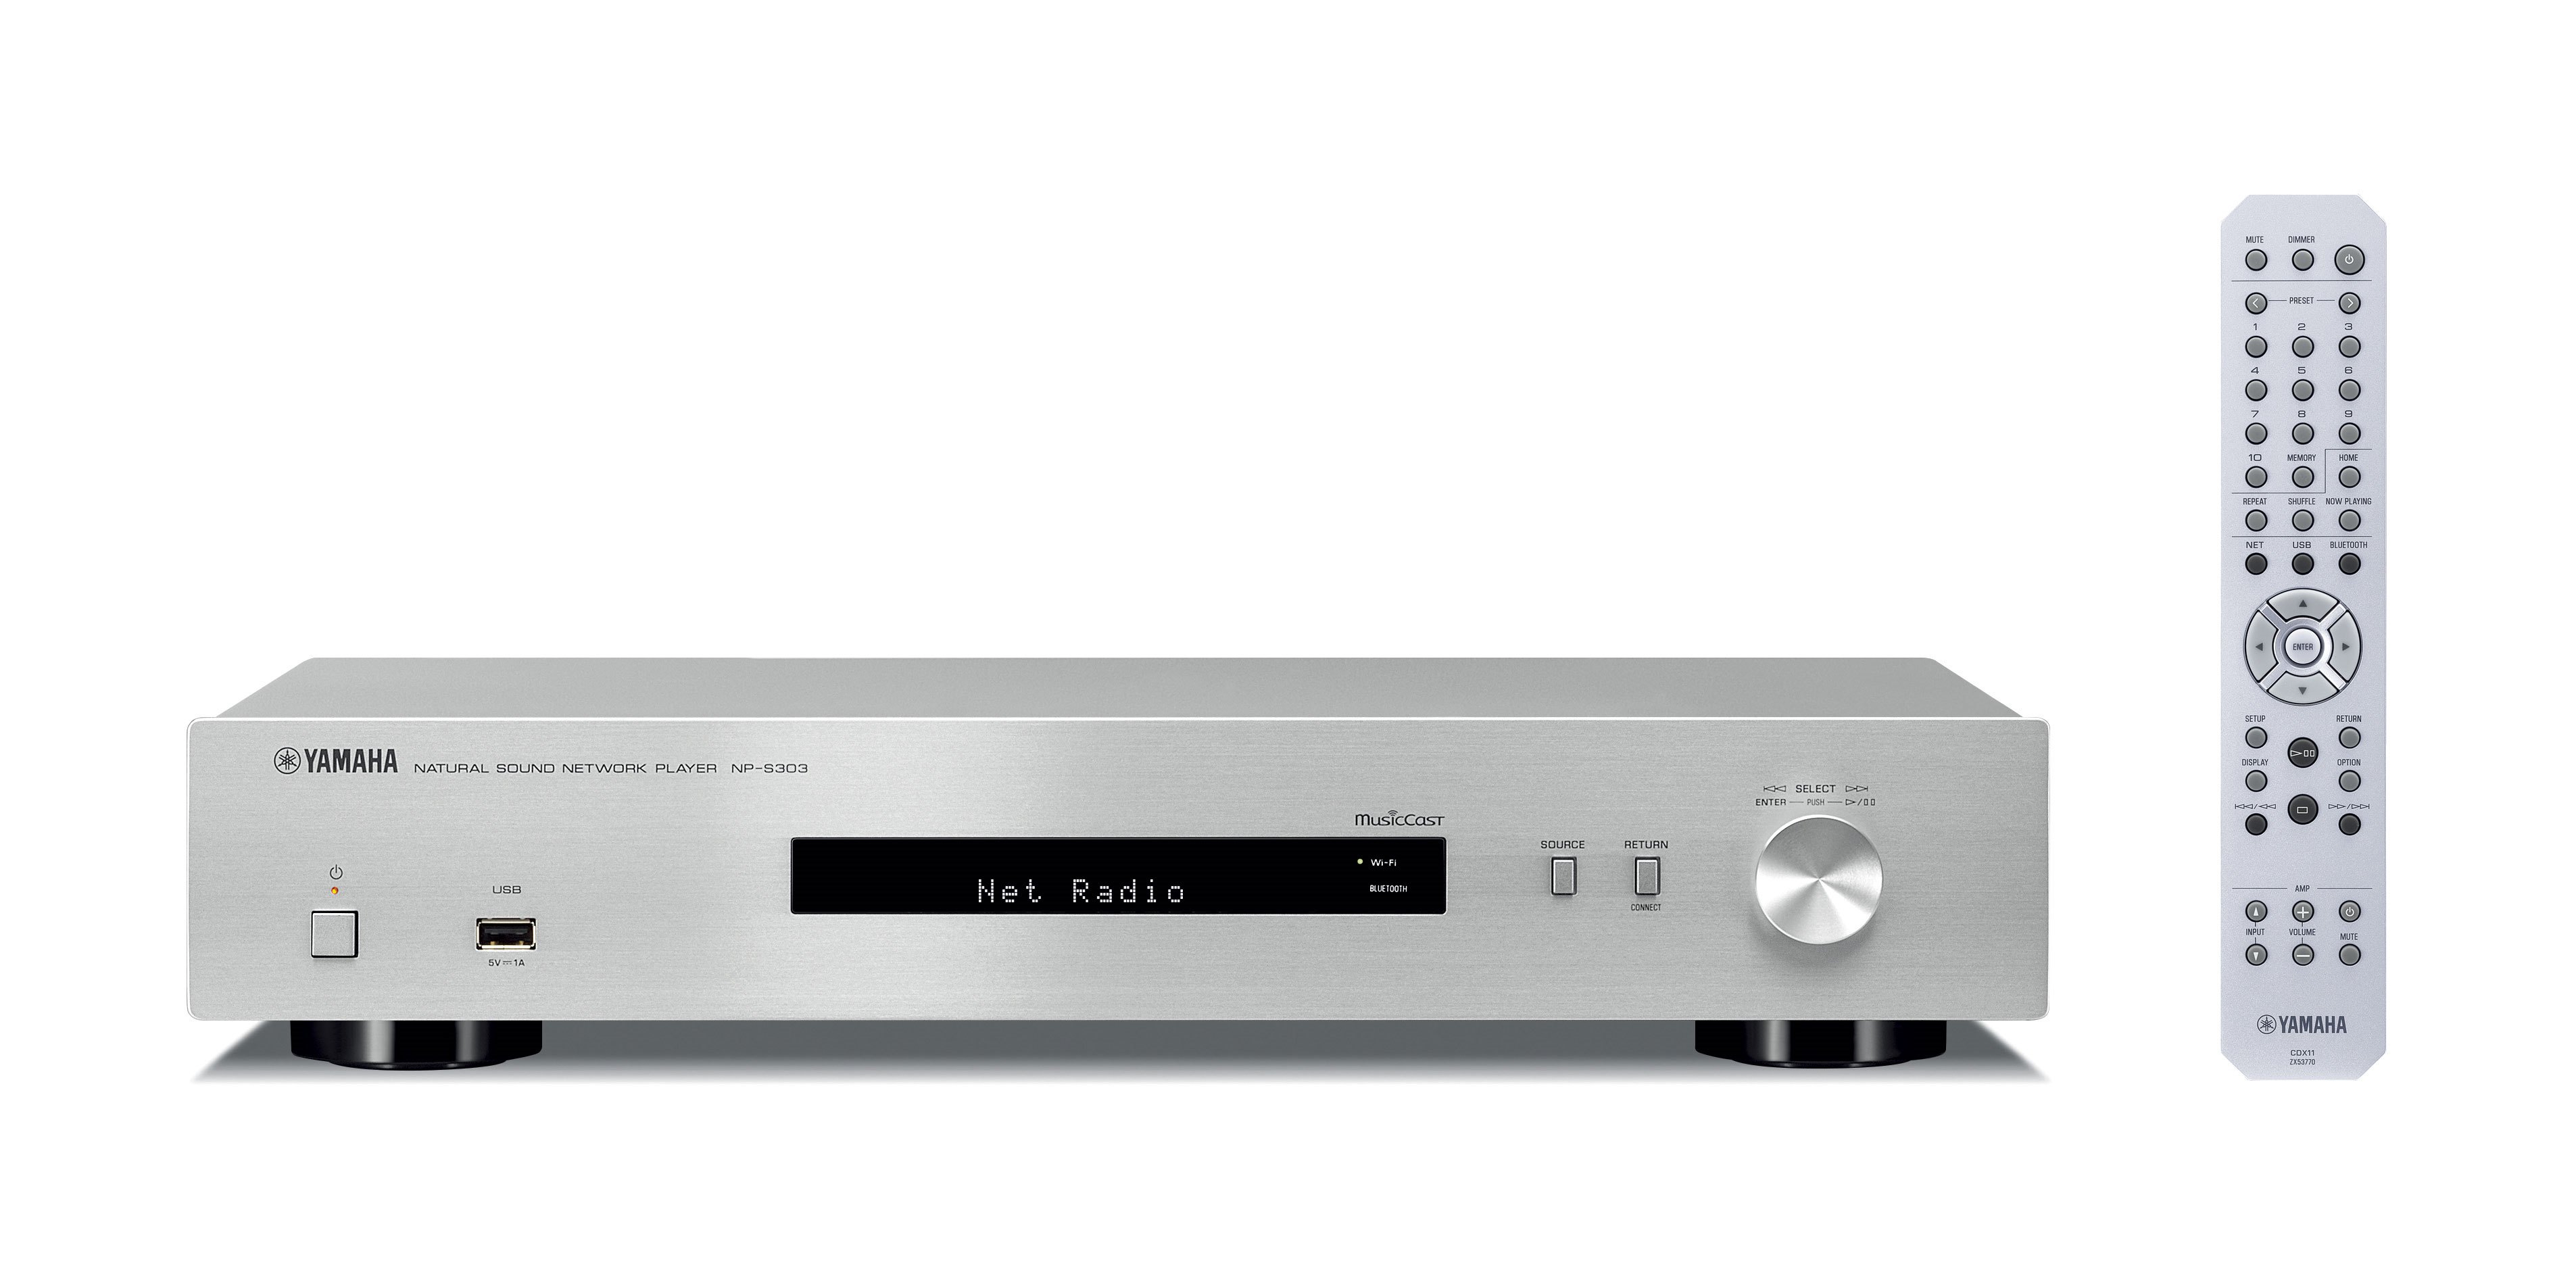 MusicCast NP-S303 - Overview - HiFi Components - Audio & Visual - Products  - Yamaha - Other European Countries